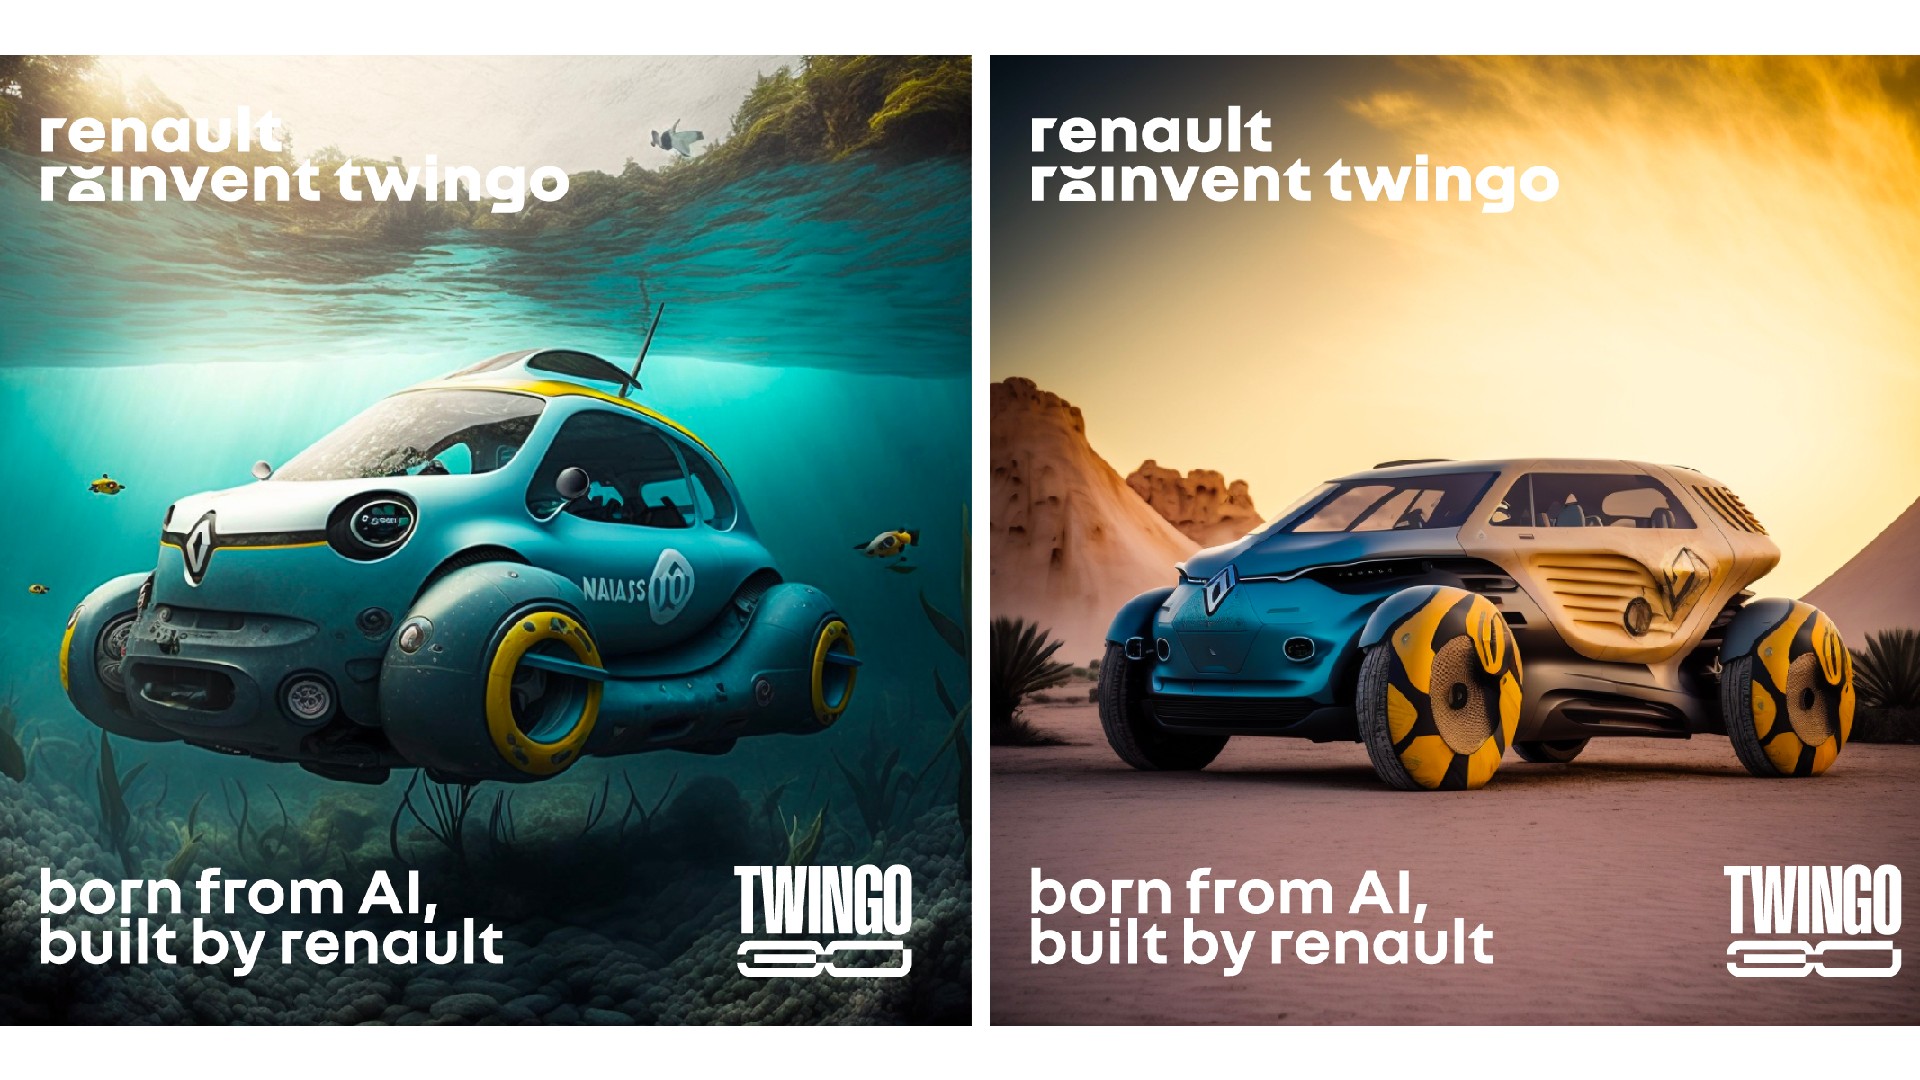 Two versions of Renault's Twingo car, rendered by AI